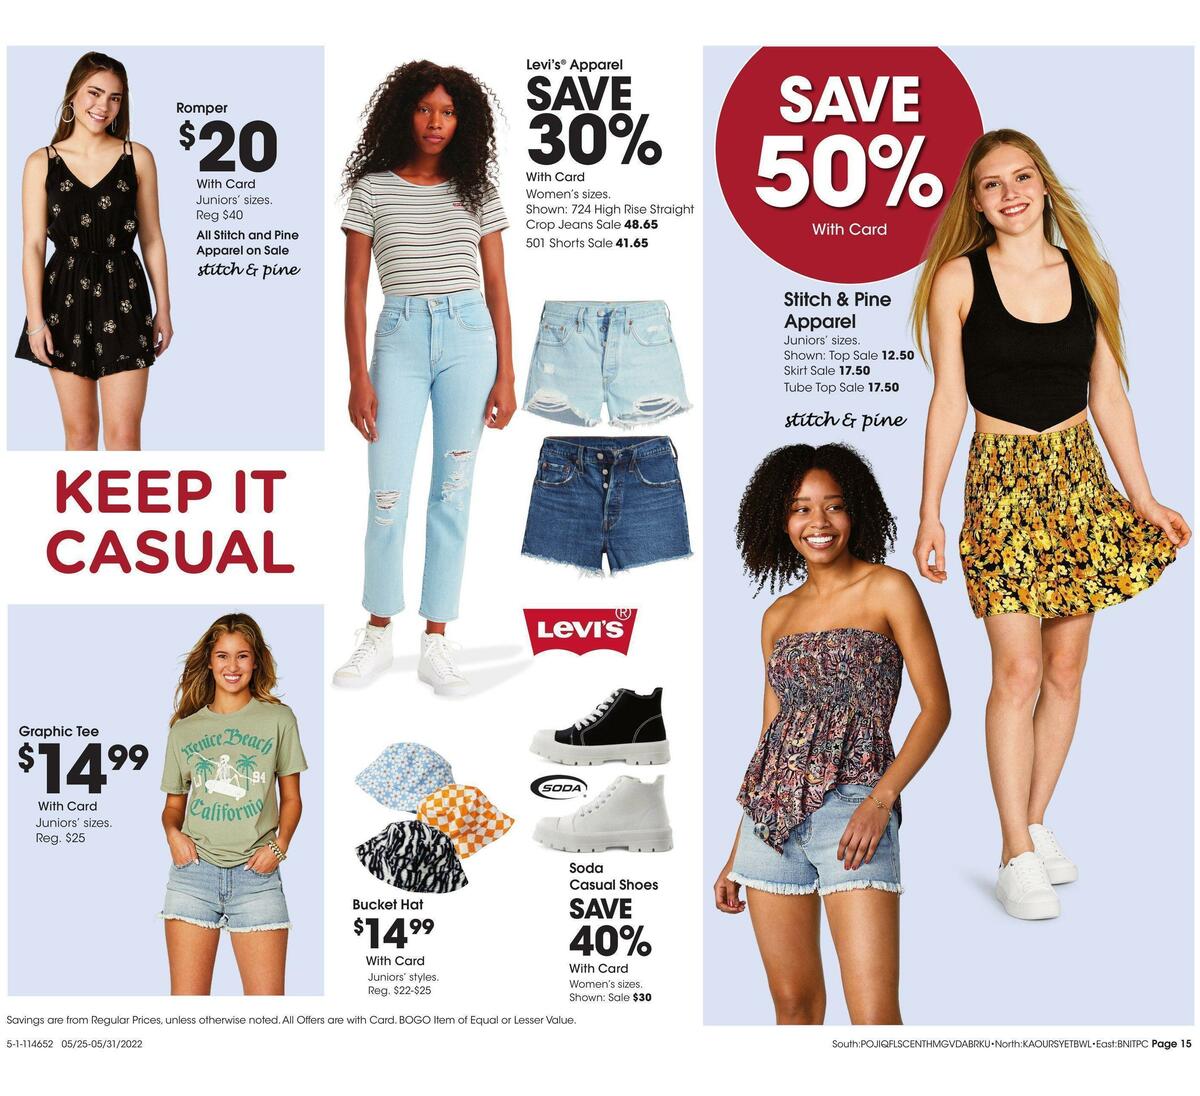 Fred Meyer General Merchandise Weekly Ad from May 25